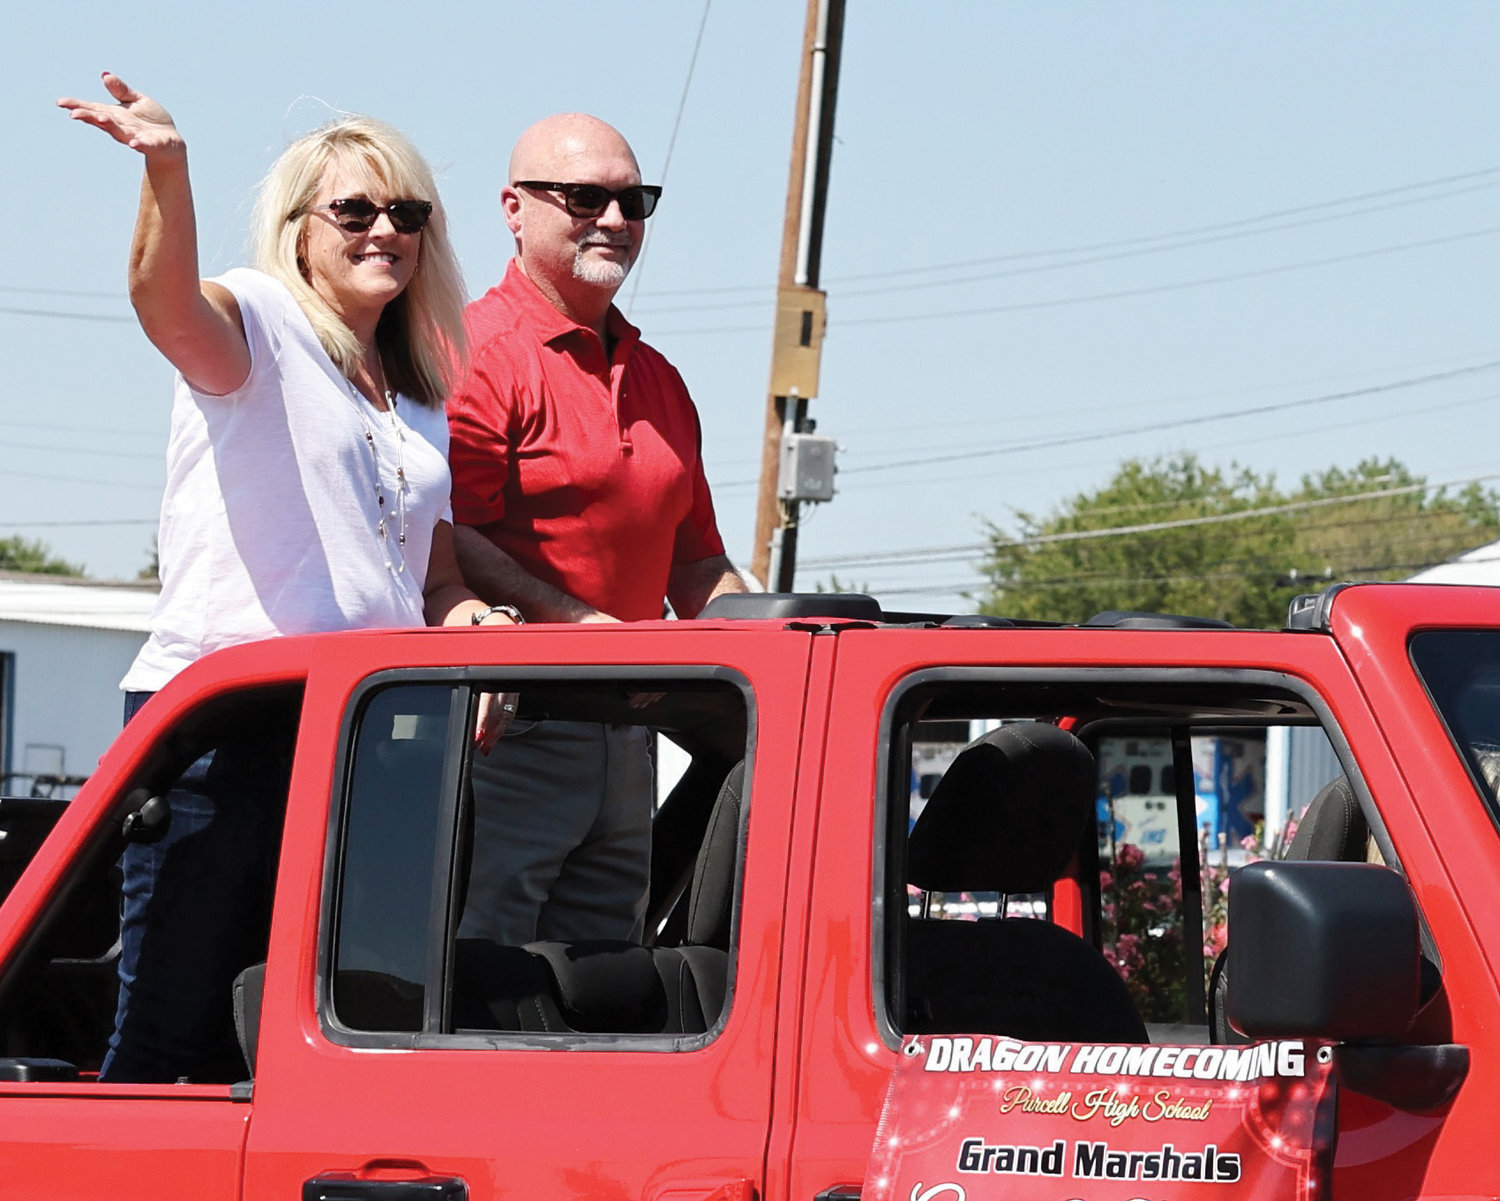 Tammy and Greg Dillard were grand marshals for the Purcell Homecoming parade on Friday.